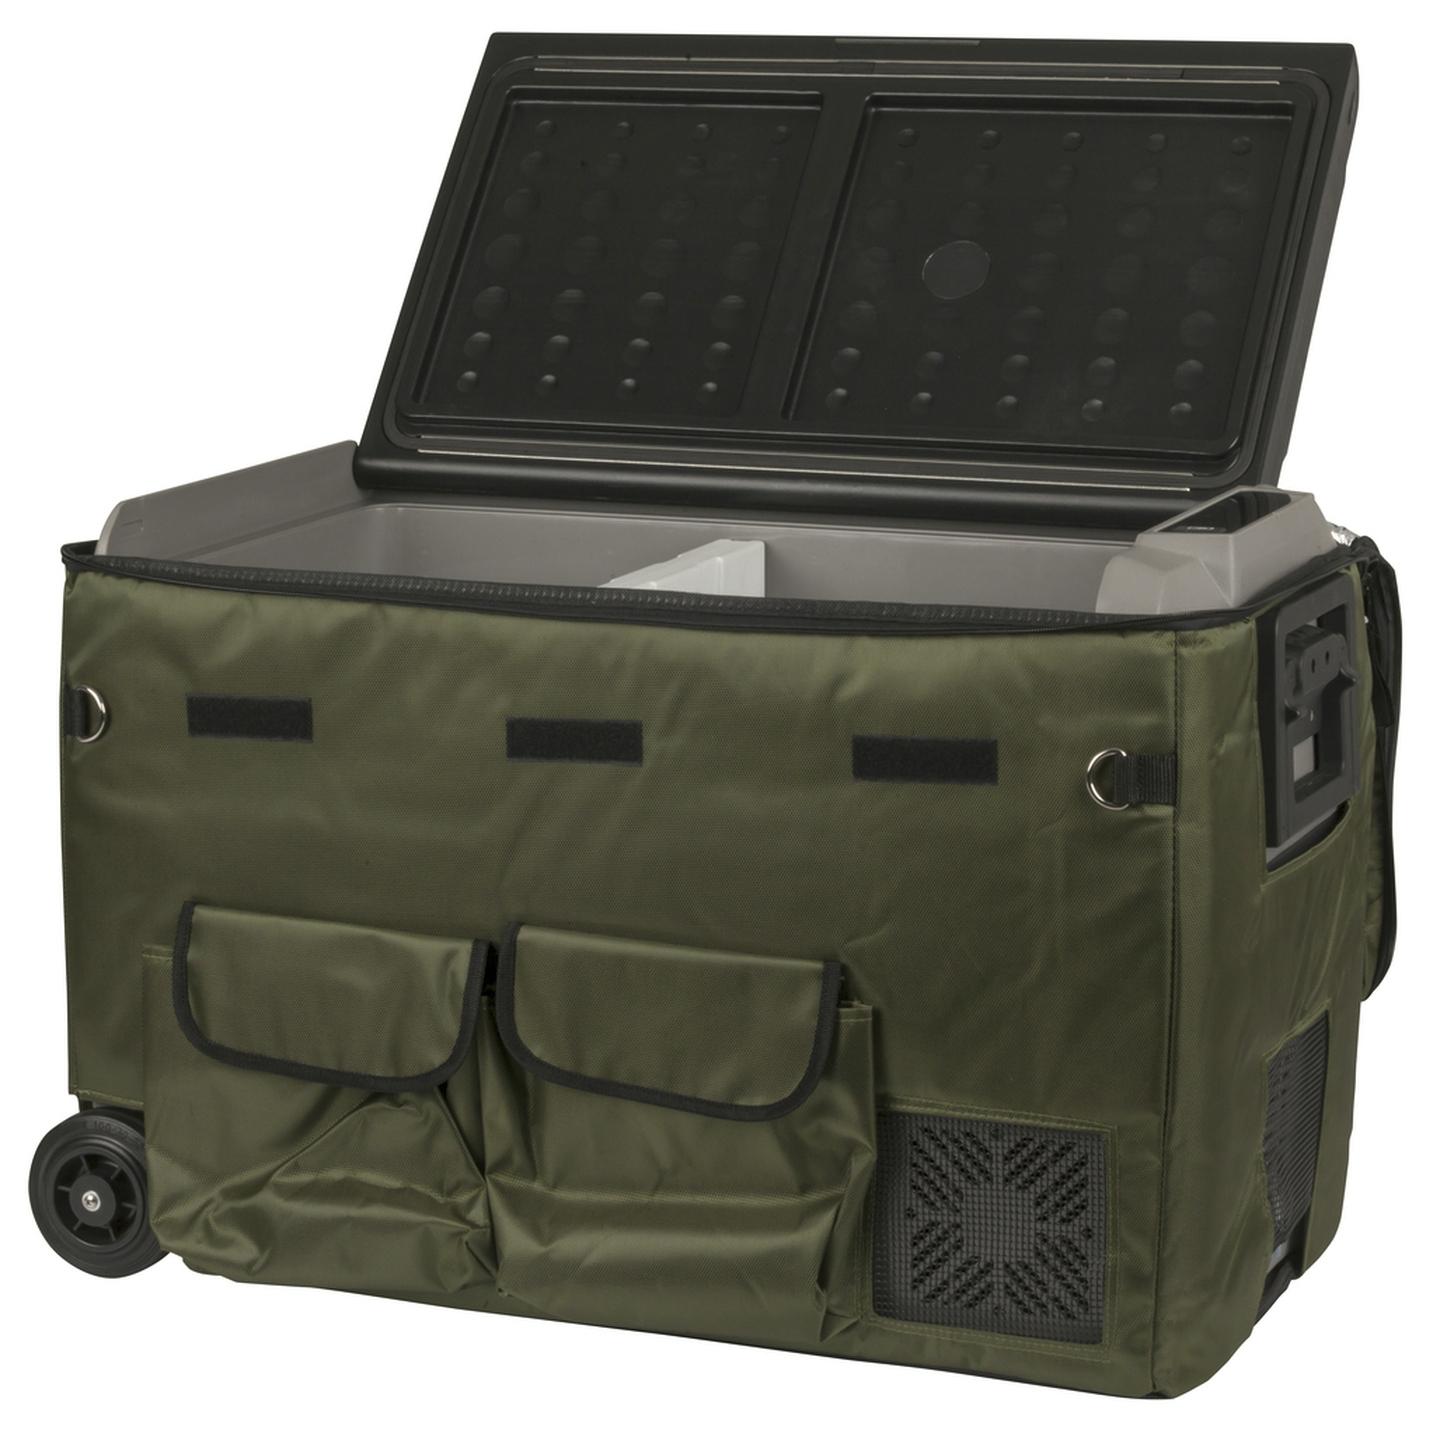 Green Insulated Cover for 60L Brass Monkey Portable Fridge/Freezer